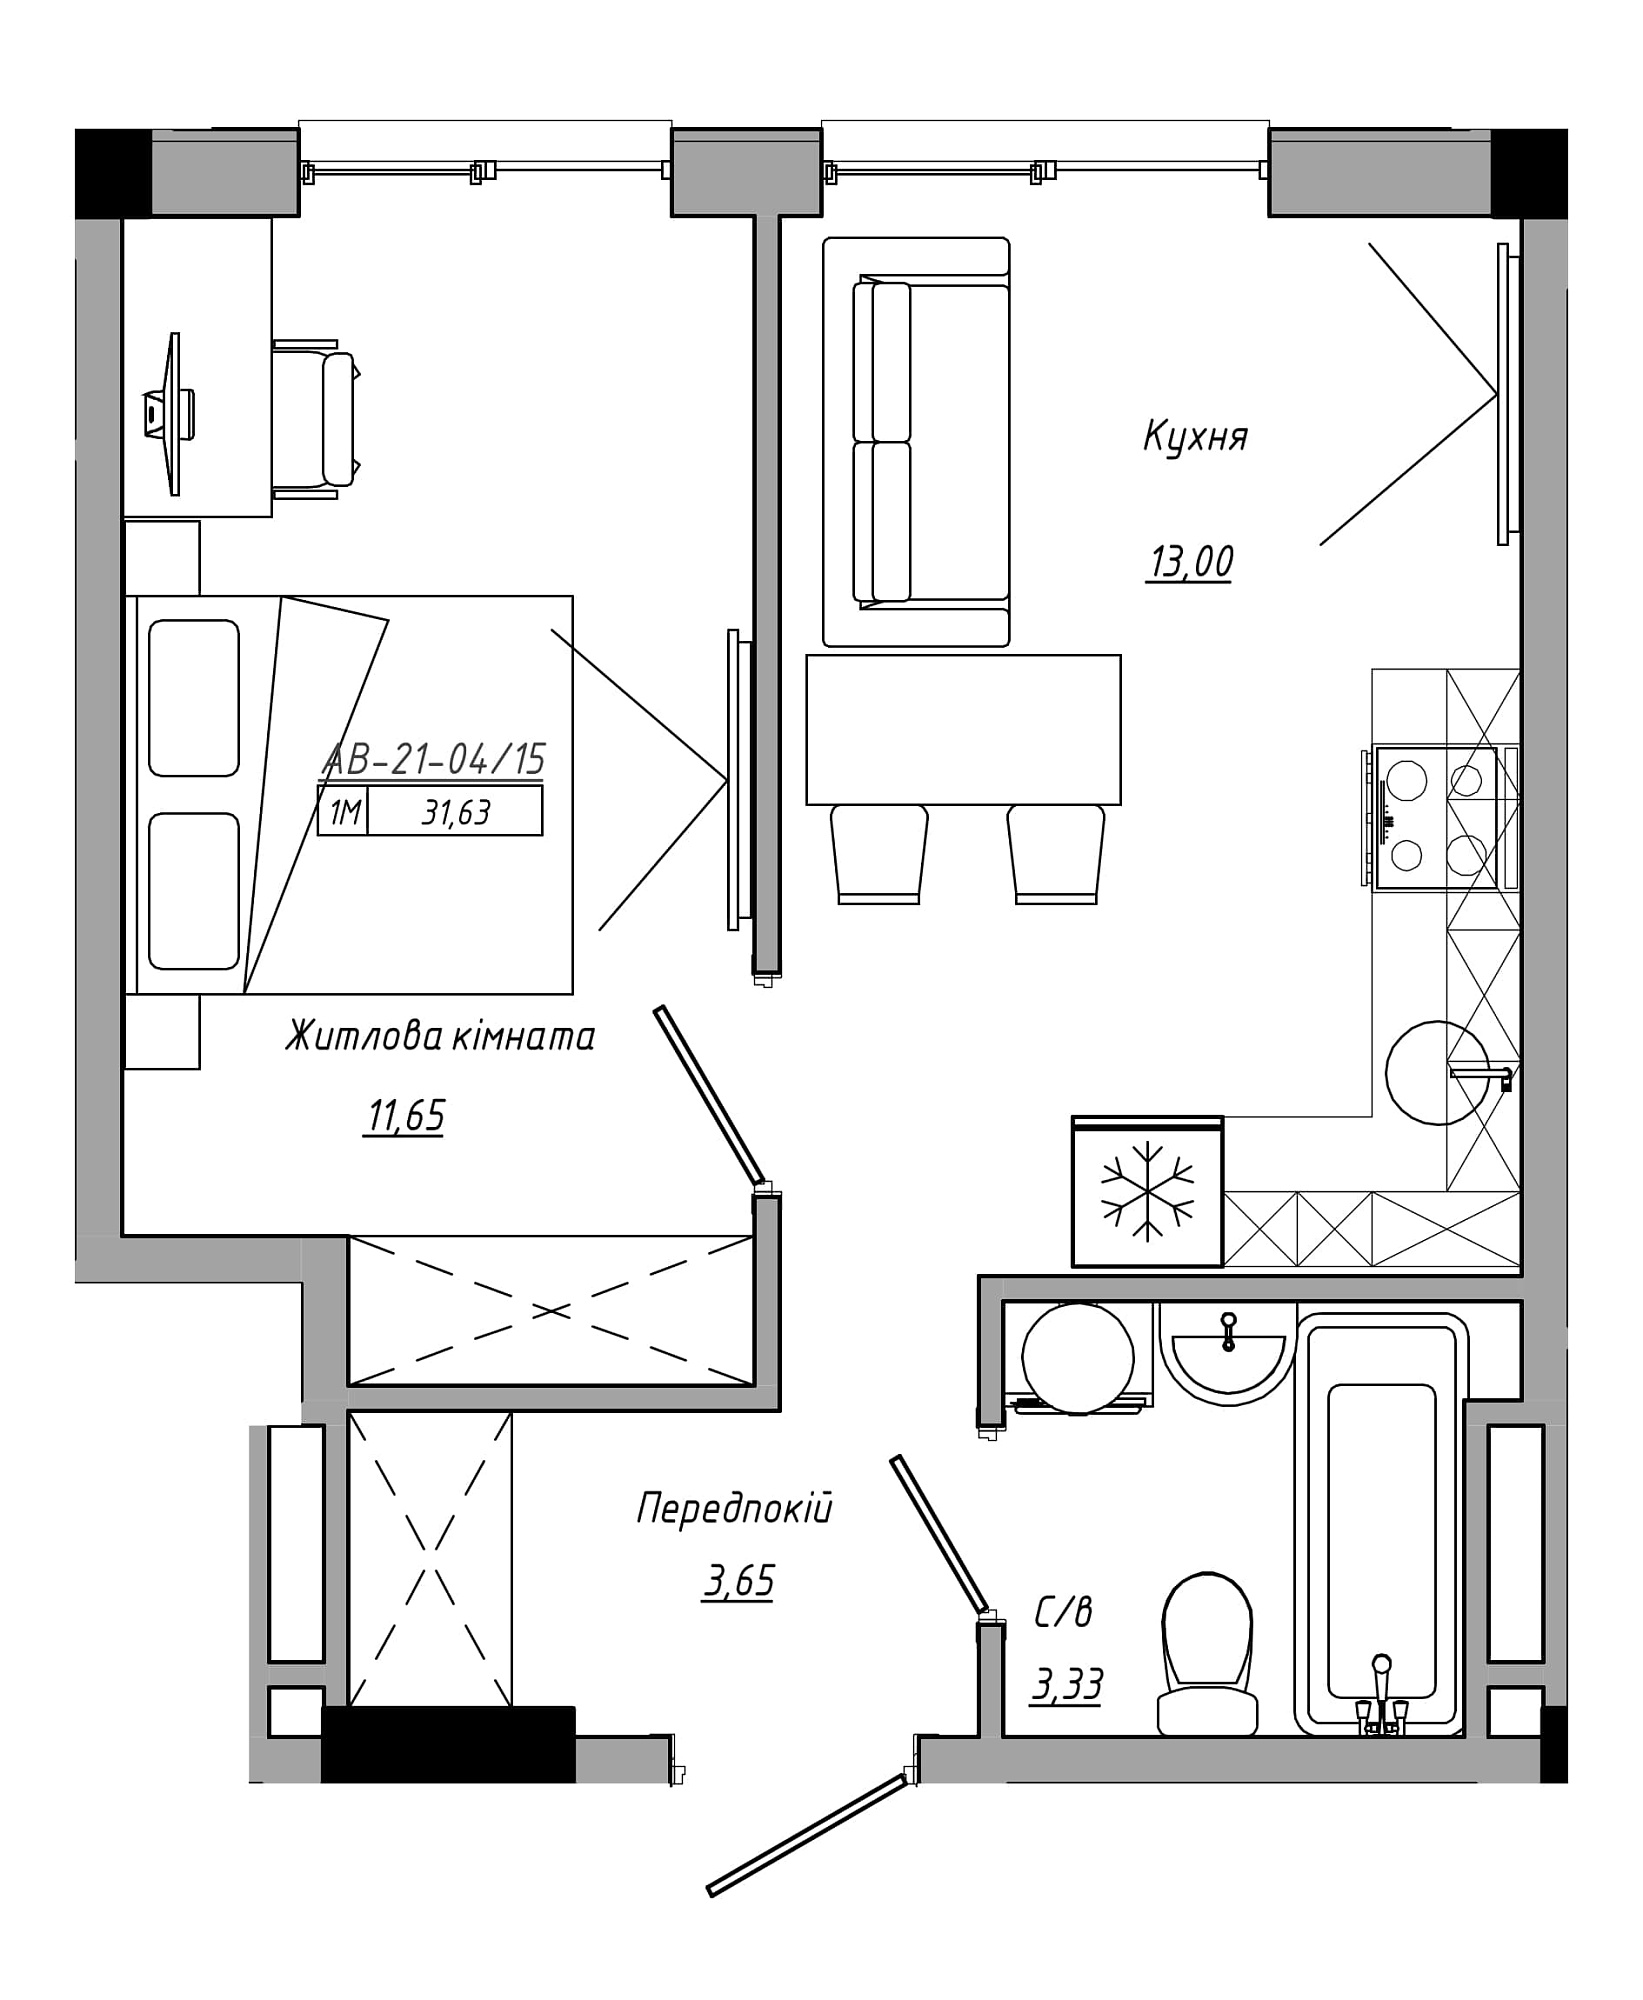 Planning 1-rm flats area 31.63m2, AB-21-04/00015.